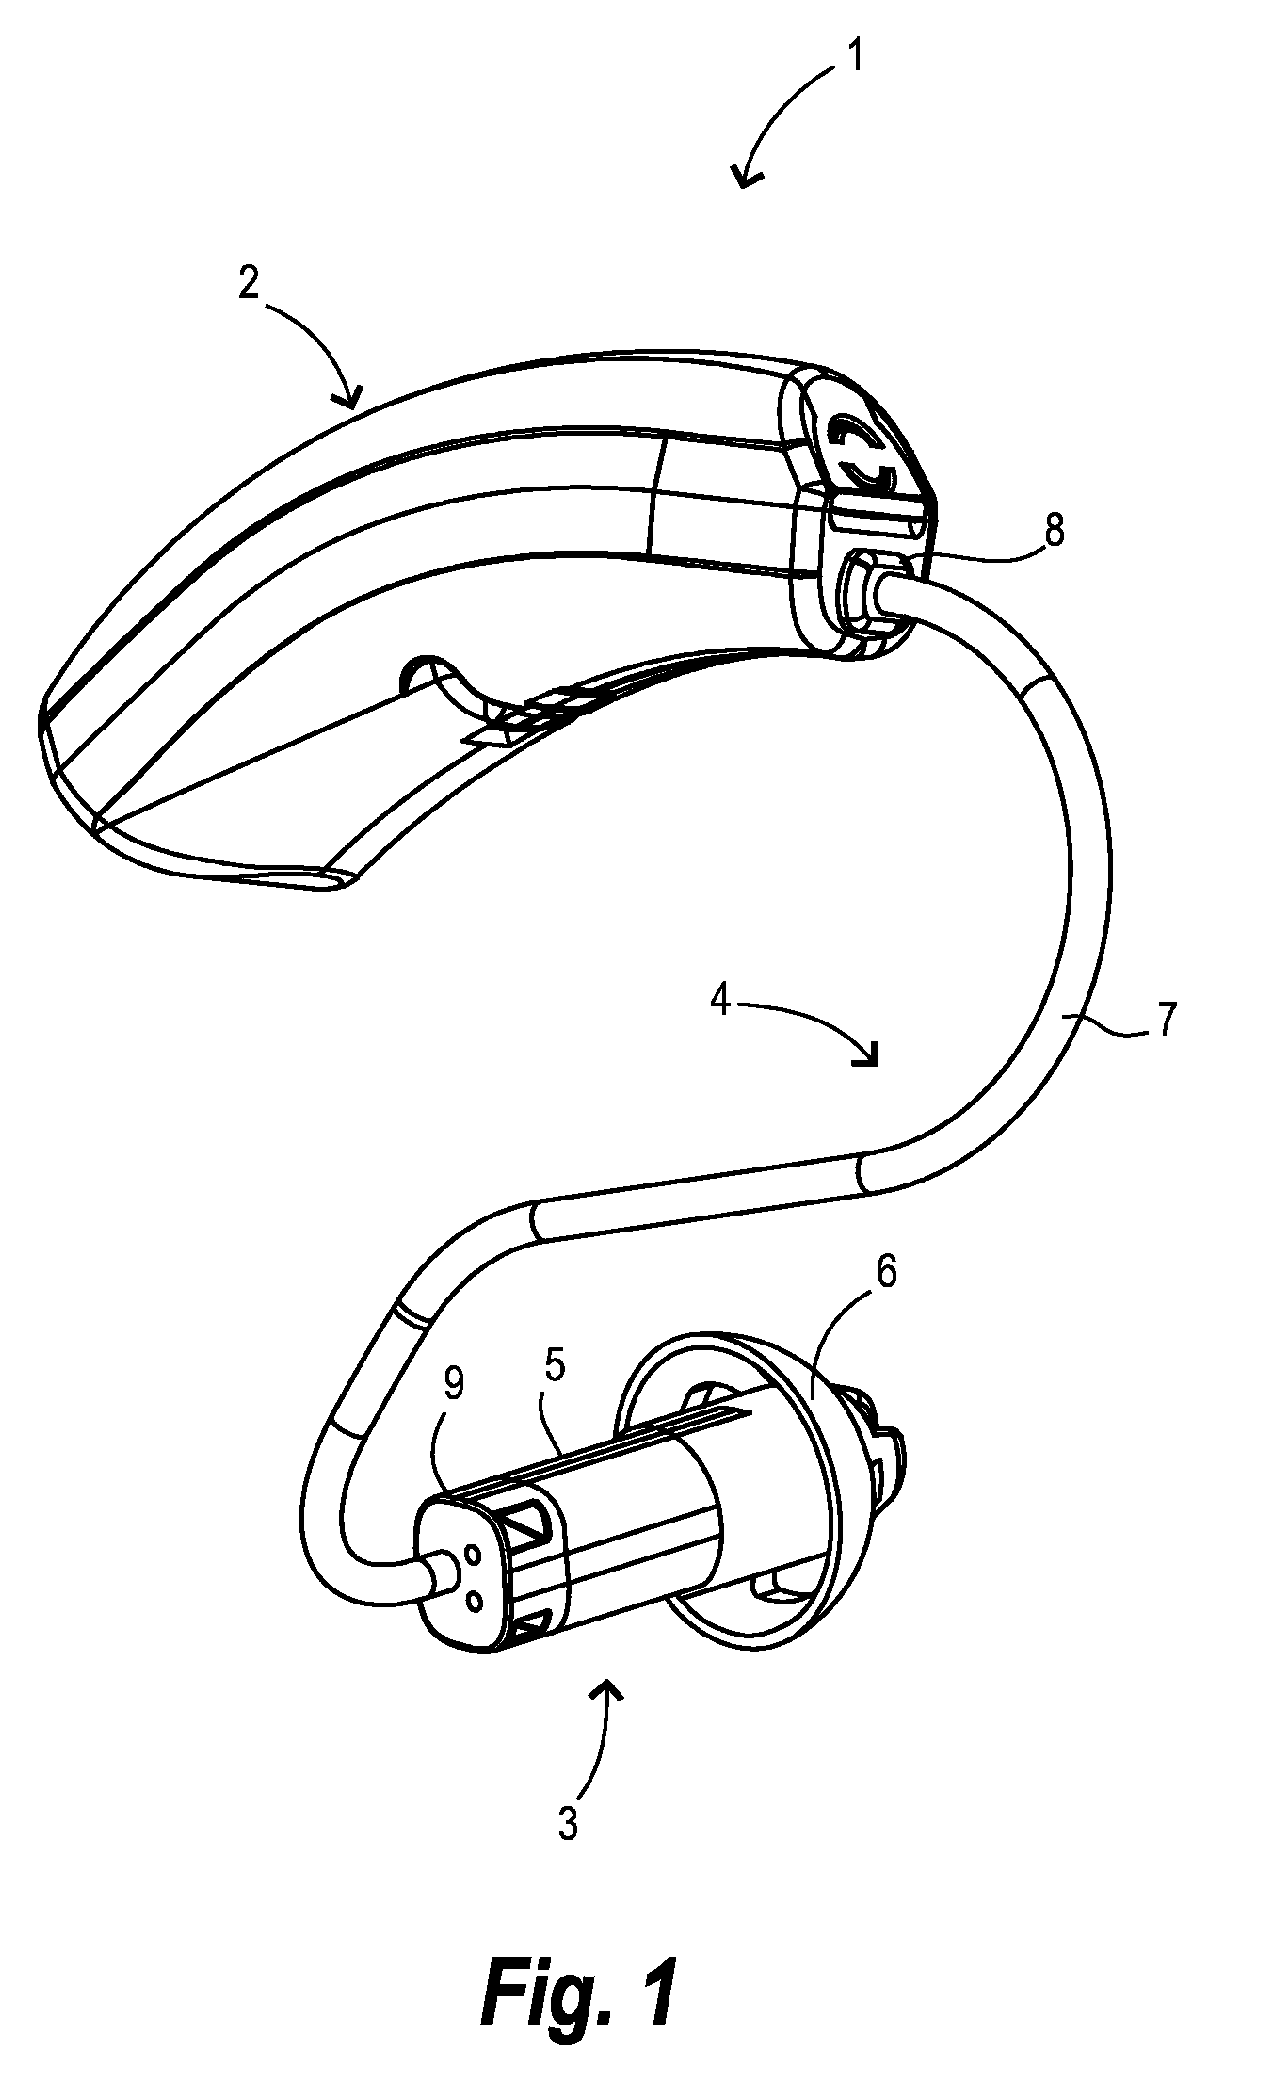 Method for identifying a receiver in a hearing aid